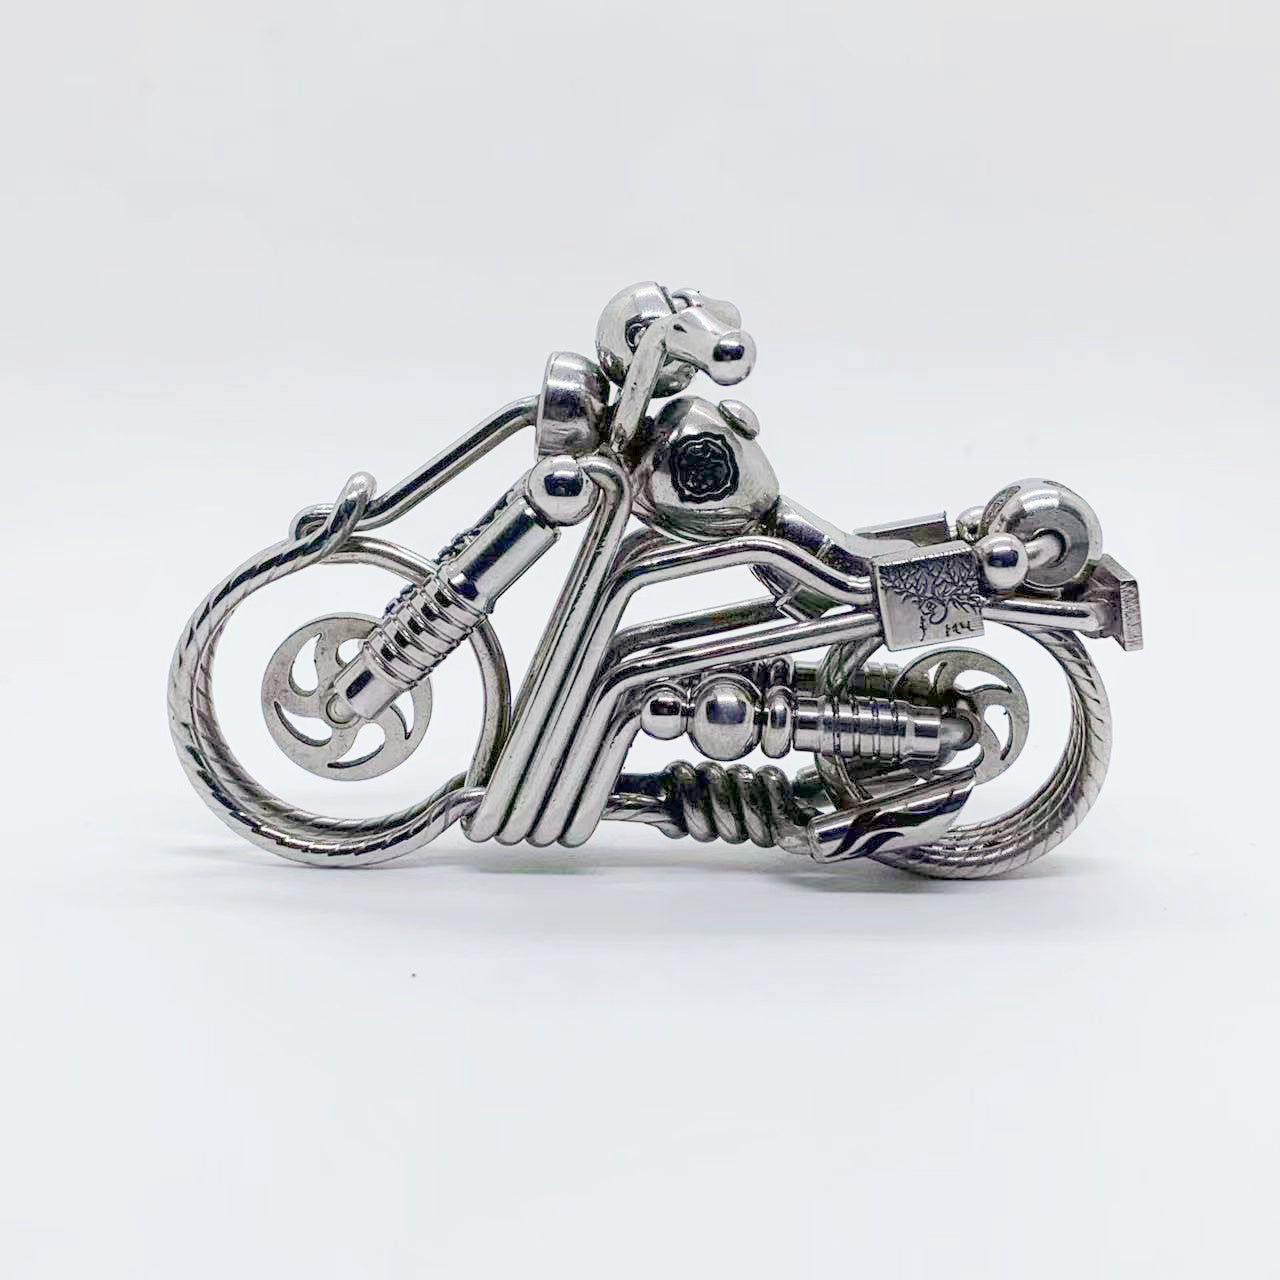 Handmade stainless steel wire for motorcycle keychain